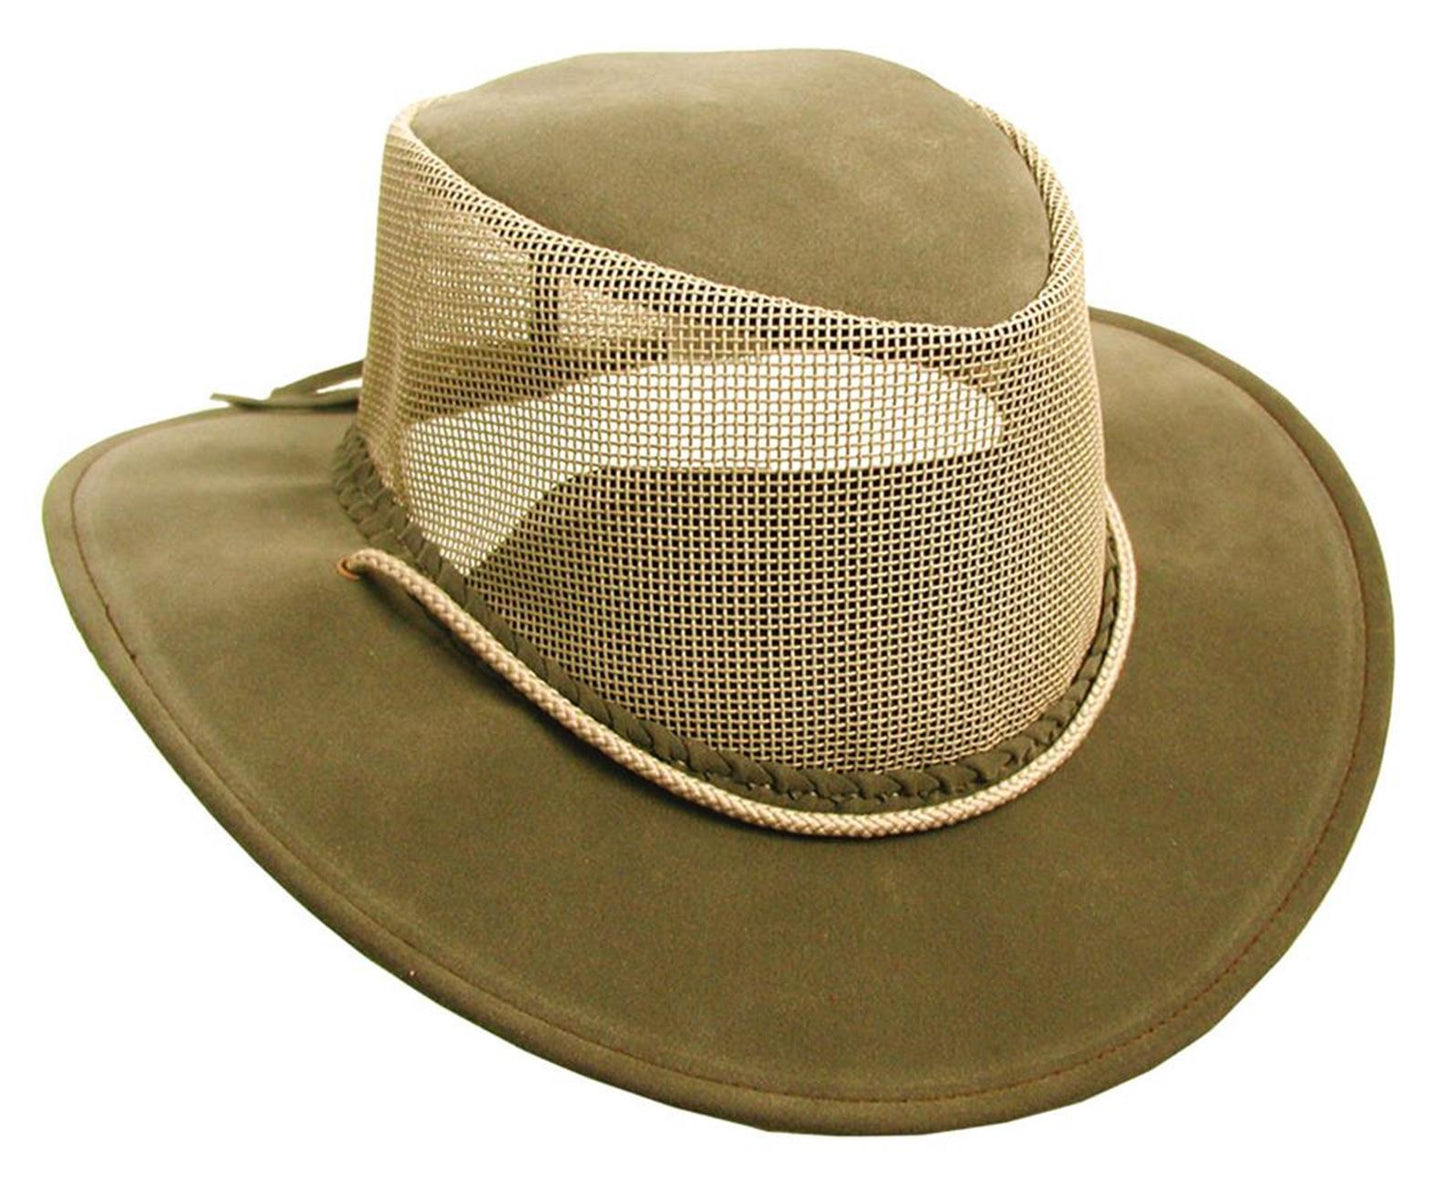 Outdoor summer hat made of microfiber with a net block super light and airy including chin strap waterproof with UV protection for women and men | brown